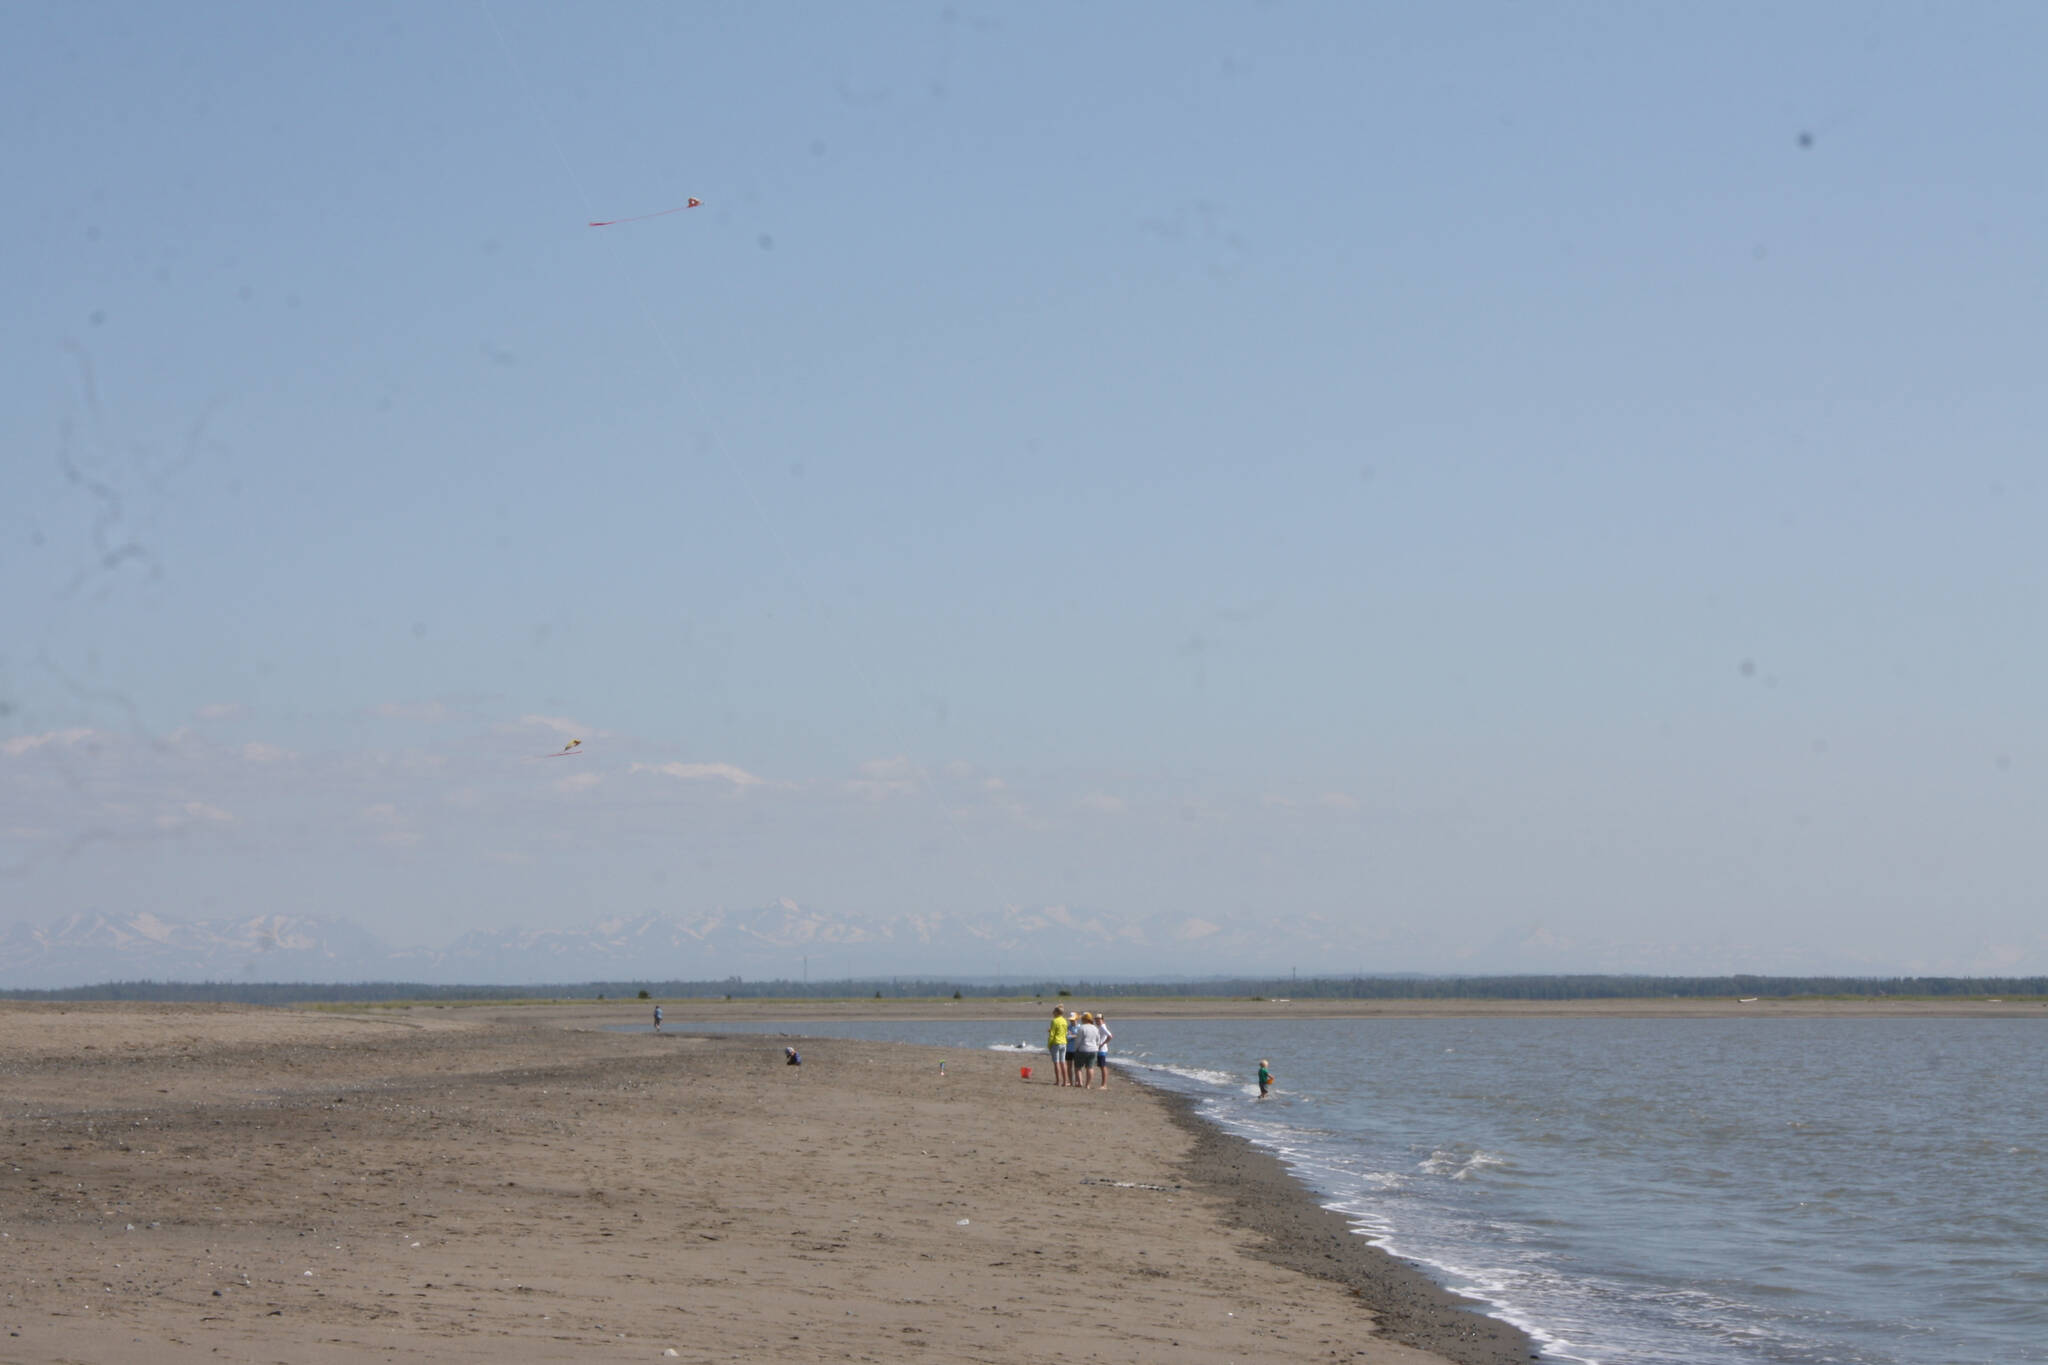 Haze can be seen on the horizon from North Kenai Beach on Tuesday, June 28, 2022, in Kenai, Alaska. An air quality advisory was issued for Southcentral Alaska on Tuesday, triggered by ongoing wildfires in the southwest that have produced increased levels of smoke in the region. (Camille Botello/Peninsula Clarion)